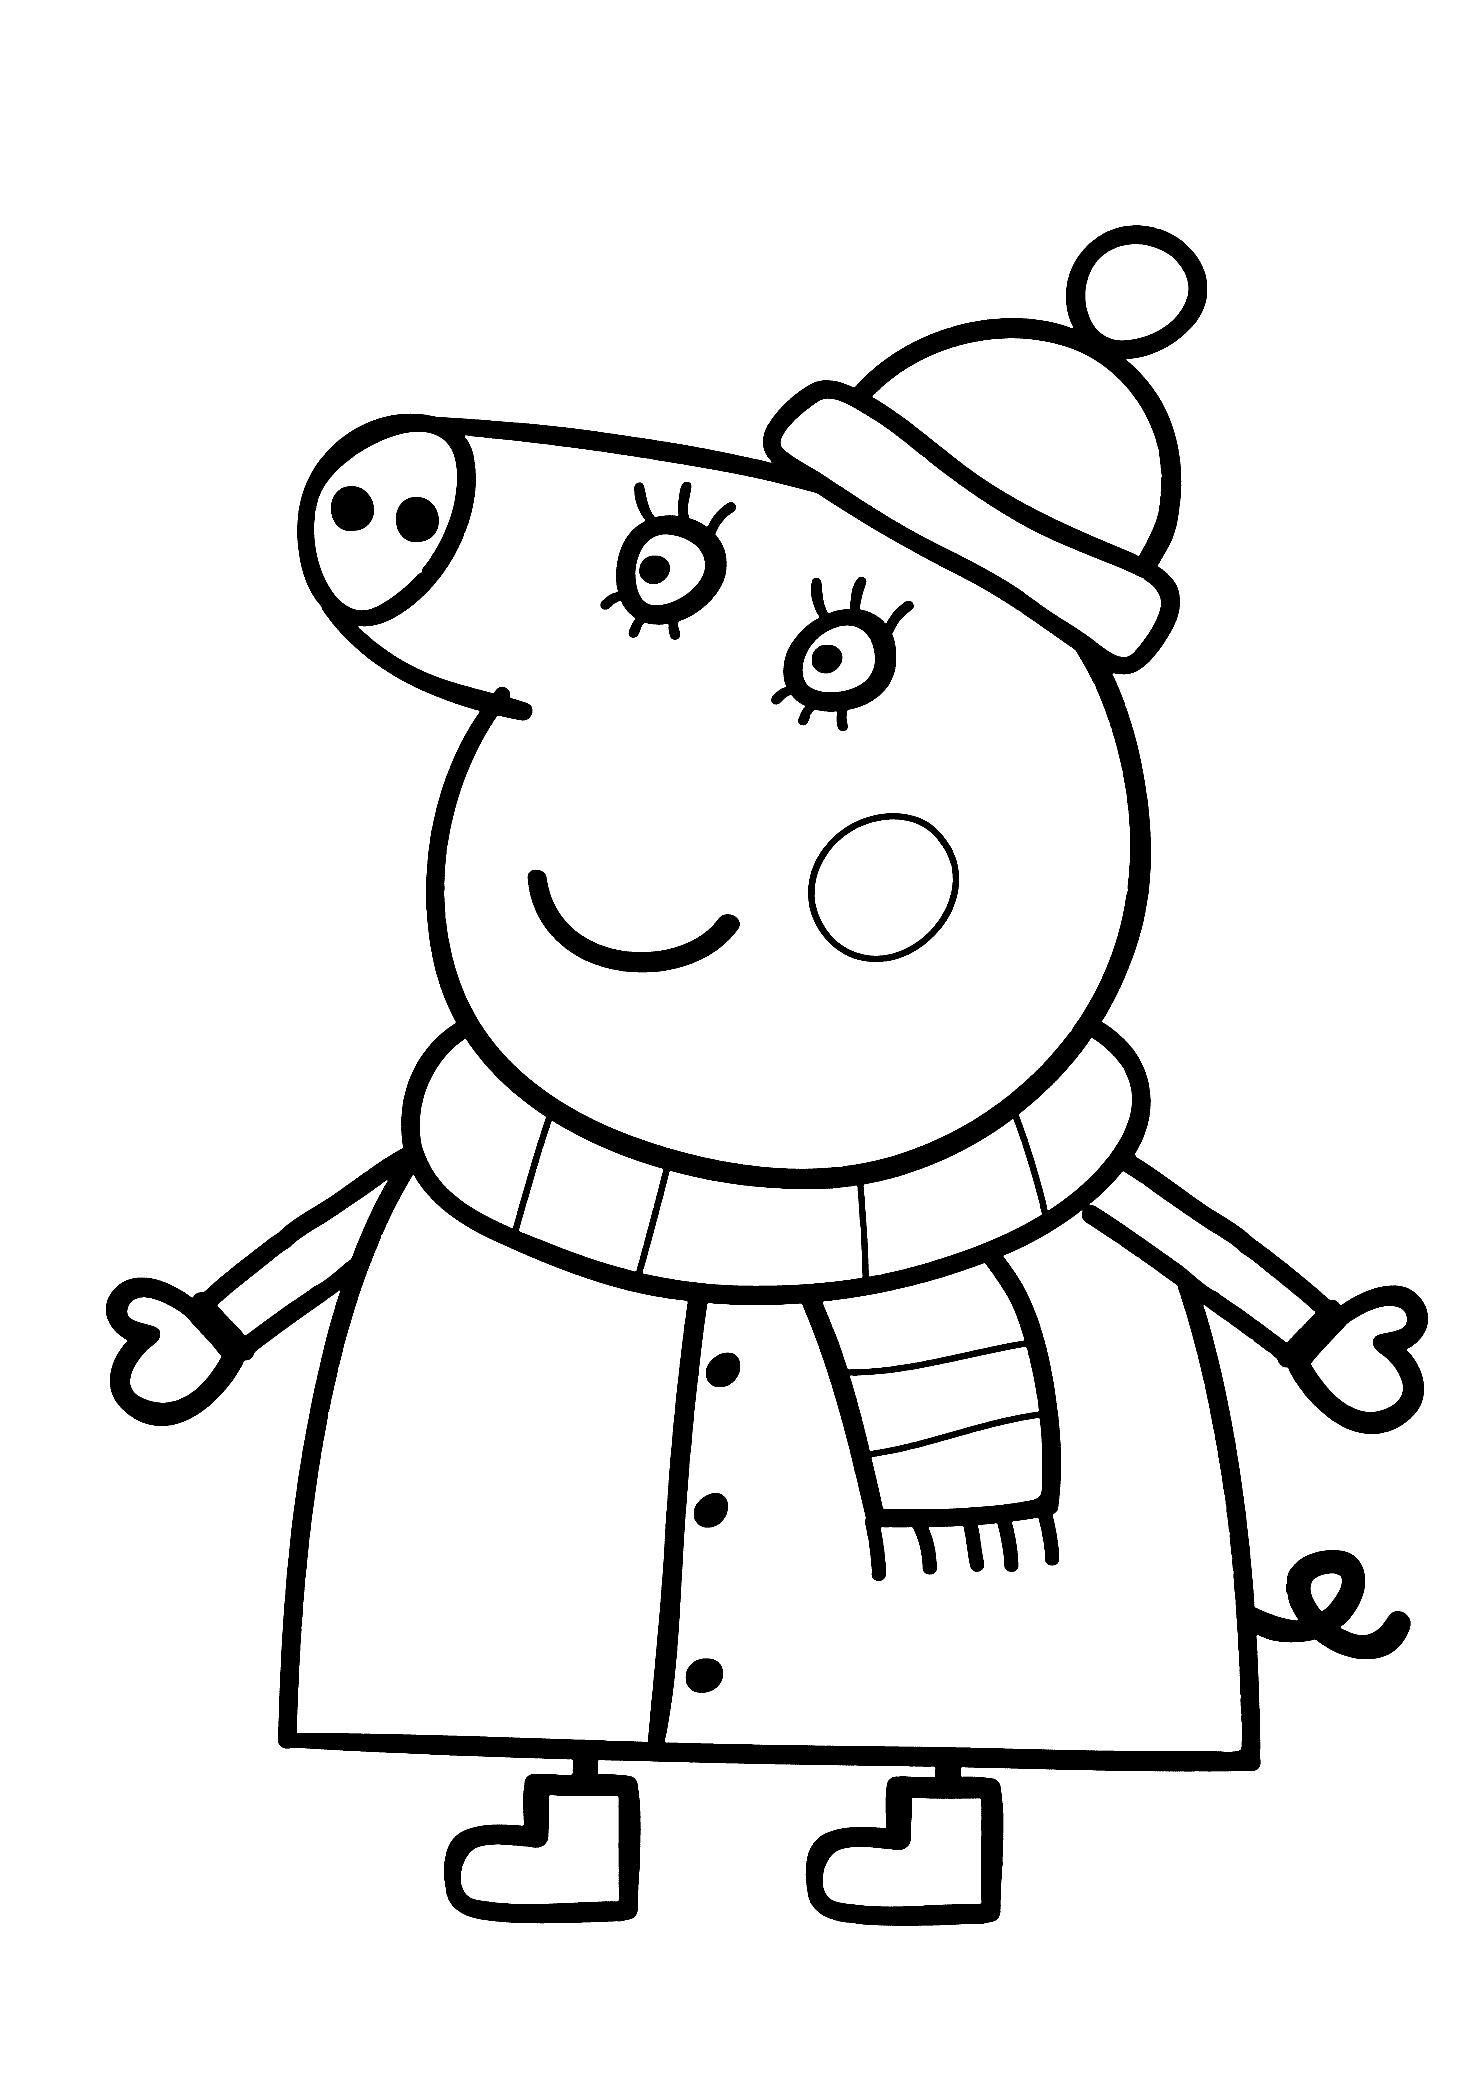 Peppa Pig Coloring Pages Best Coloring Pages For Kids